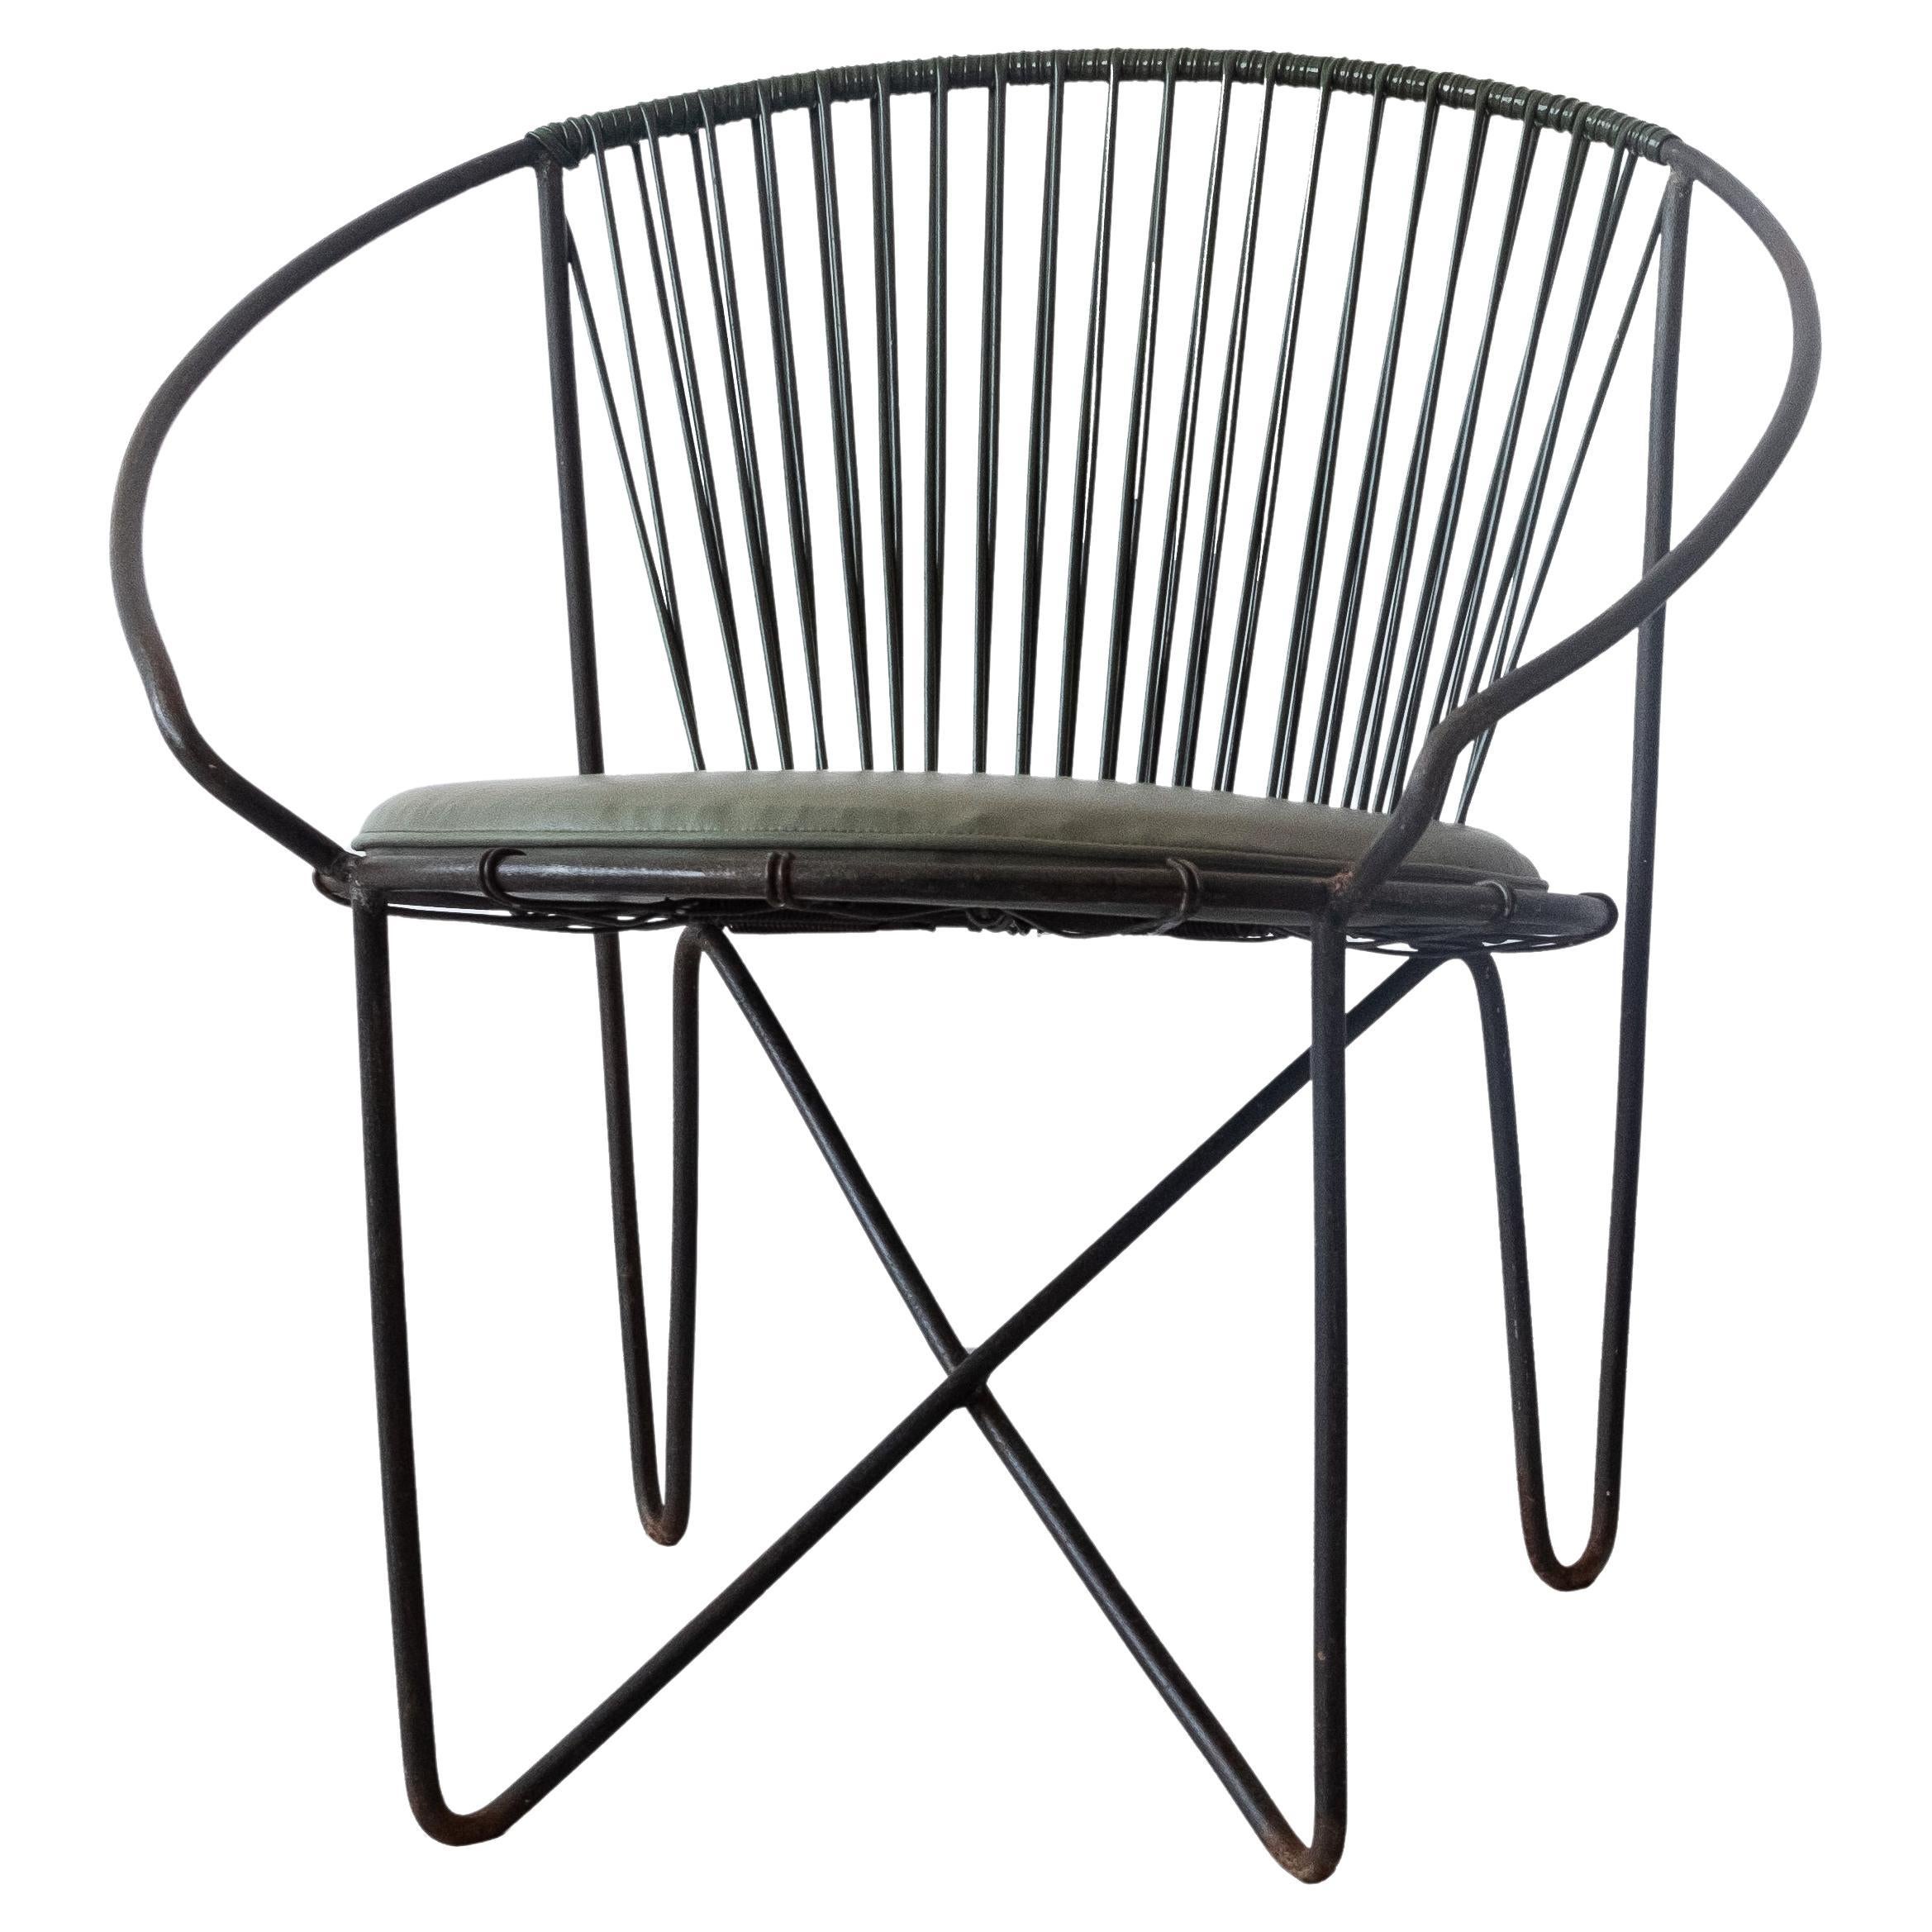 Pair of Wrought Iron chairs by José Zanine Caldas, Brazil, 1950s For Sale